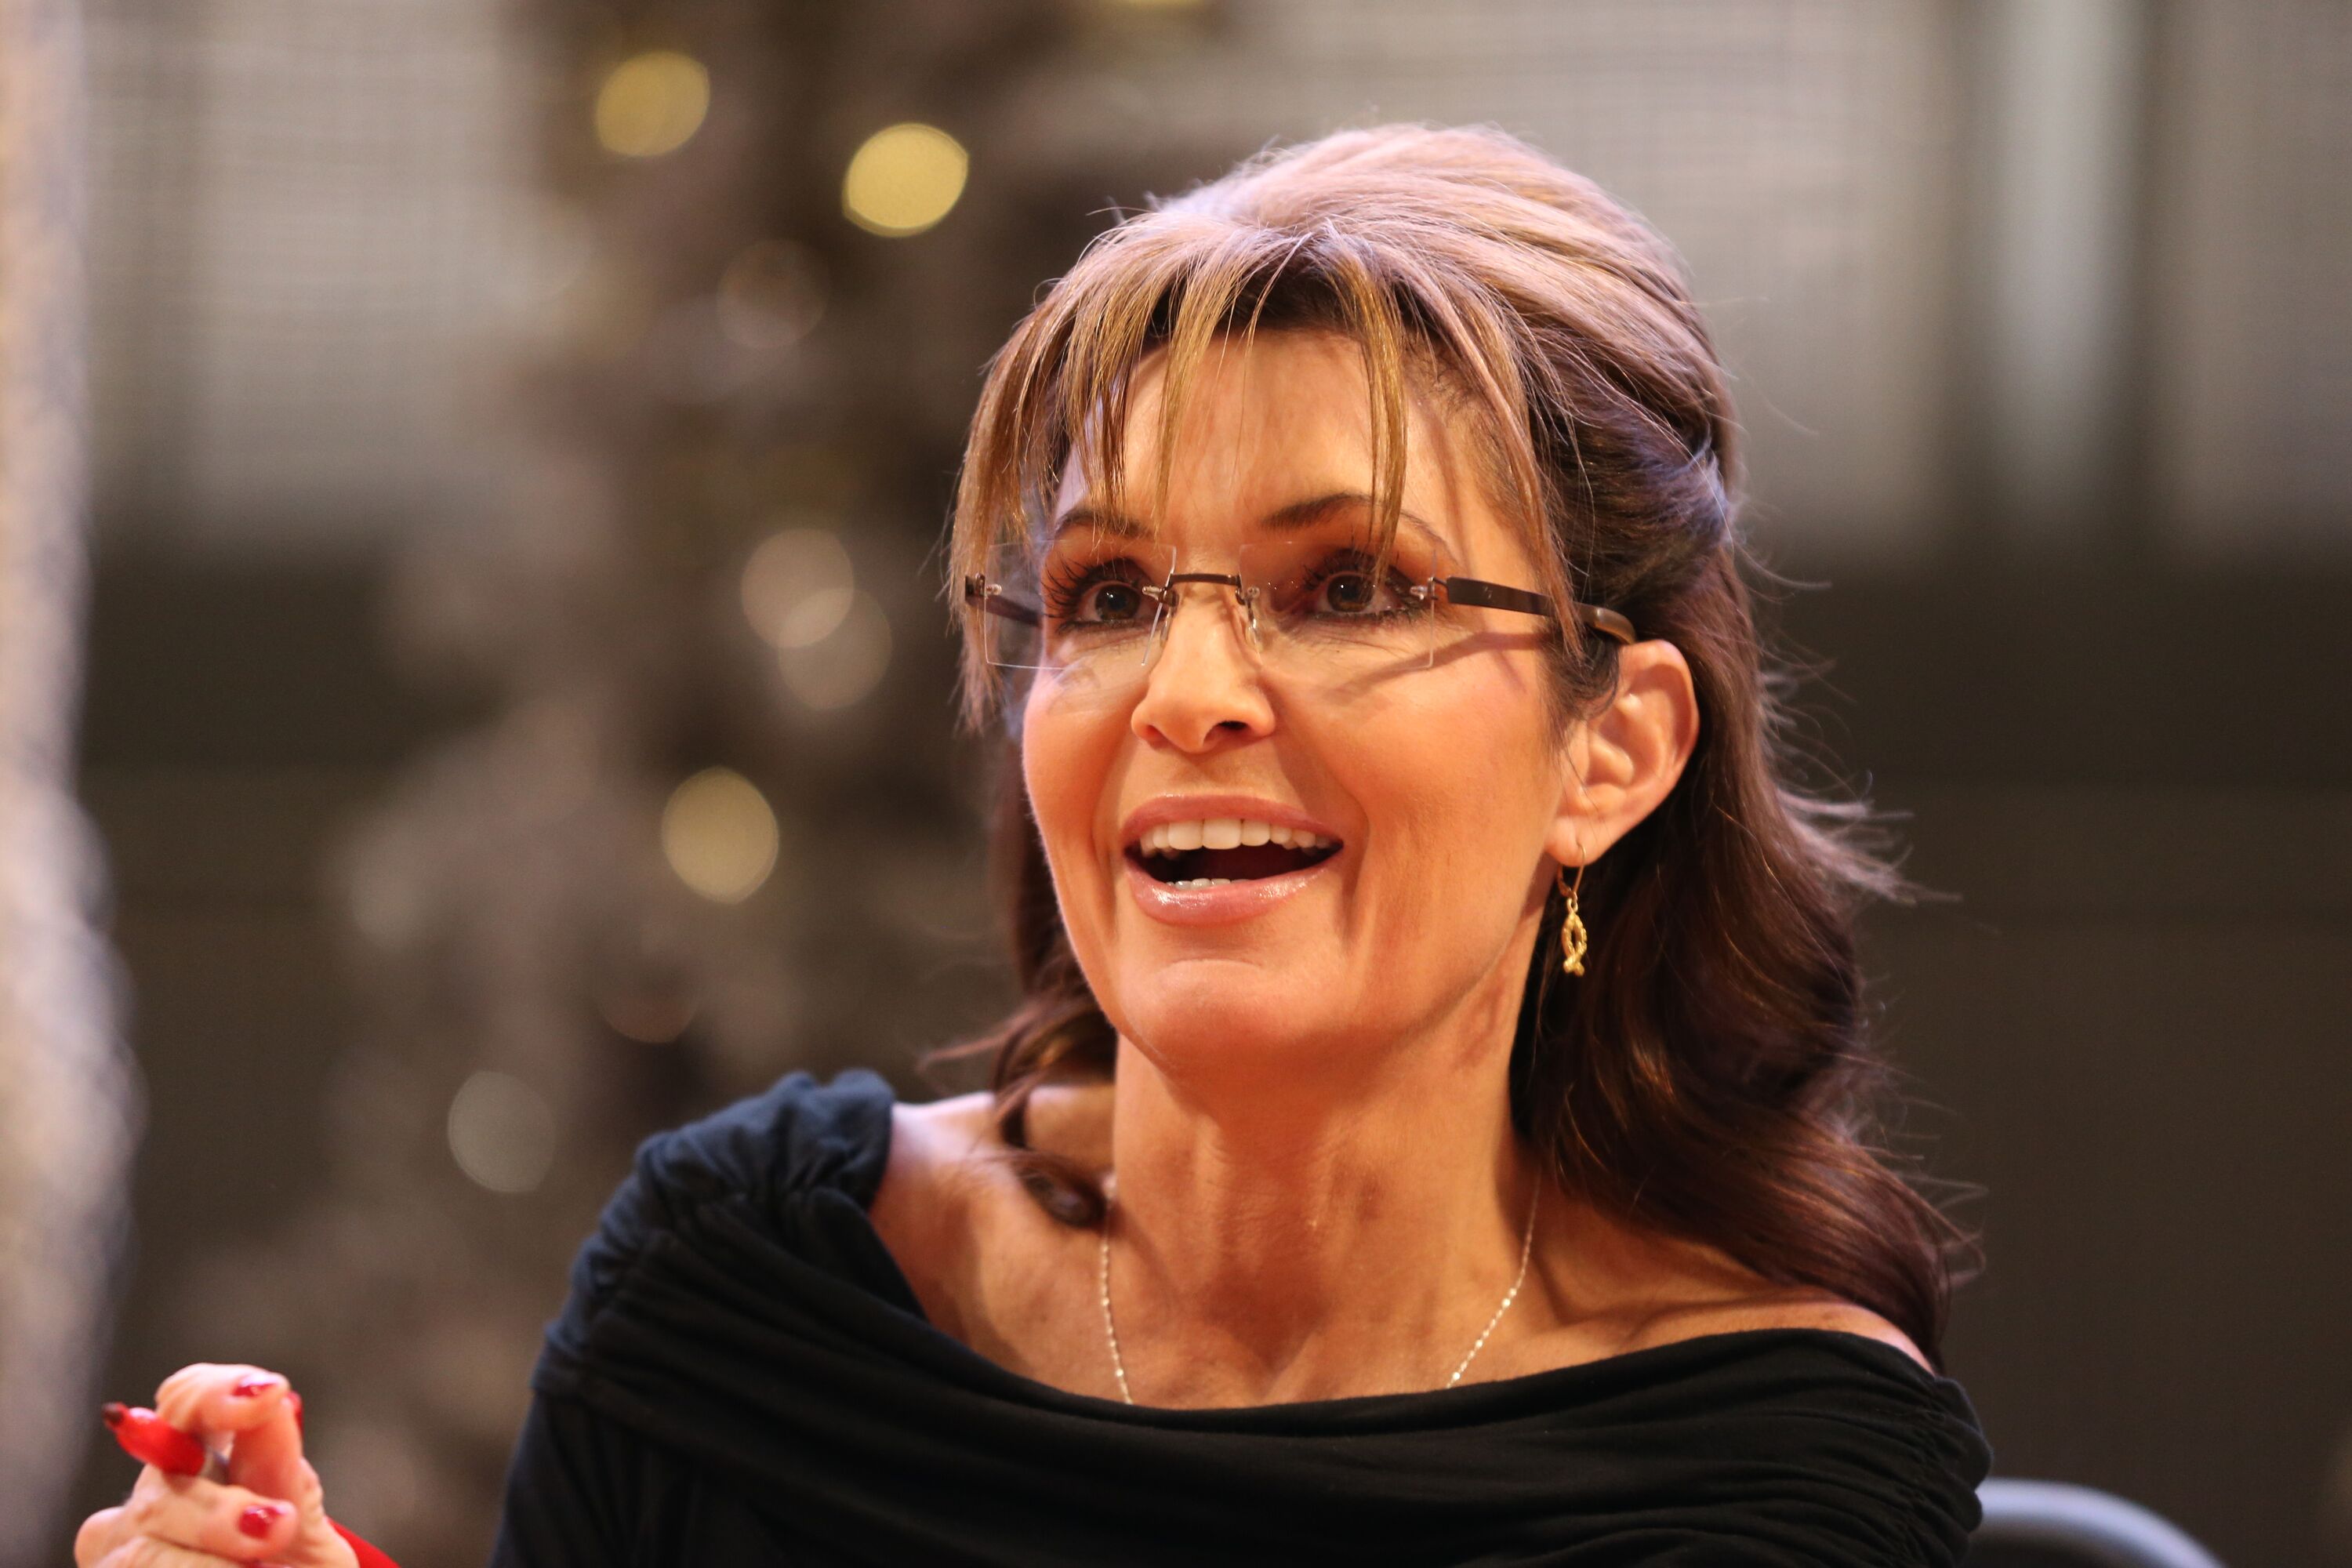 Sarah Palin signs copies of her new book "Good Tidings and Great Joy: Protecting the Heart of Christmas" on November 21, 2013 at Mall of America in Bloomington, Minnesota | Photo: Getty Images 